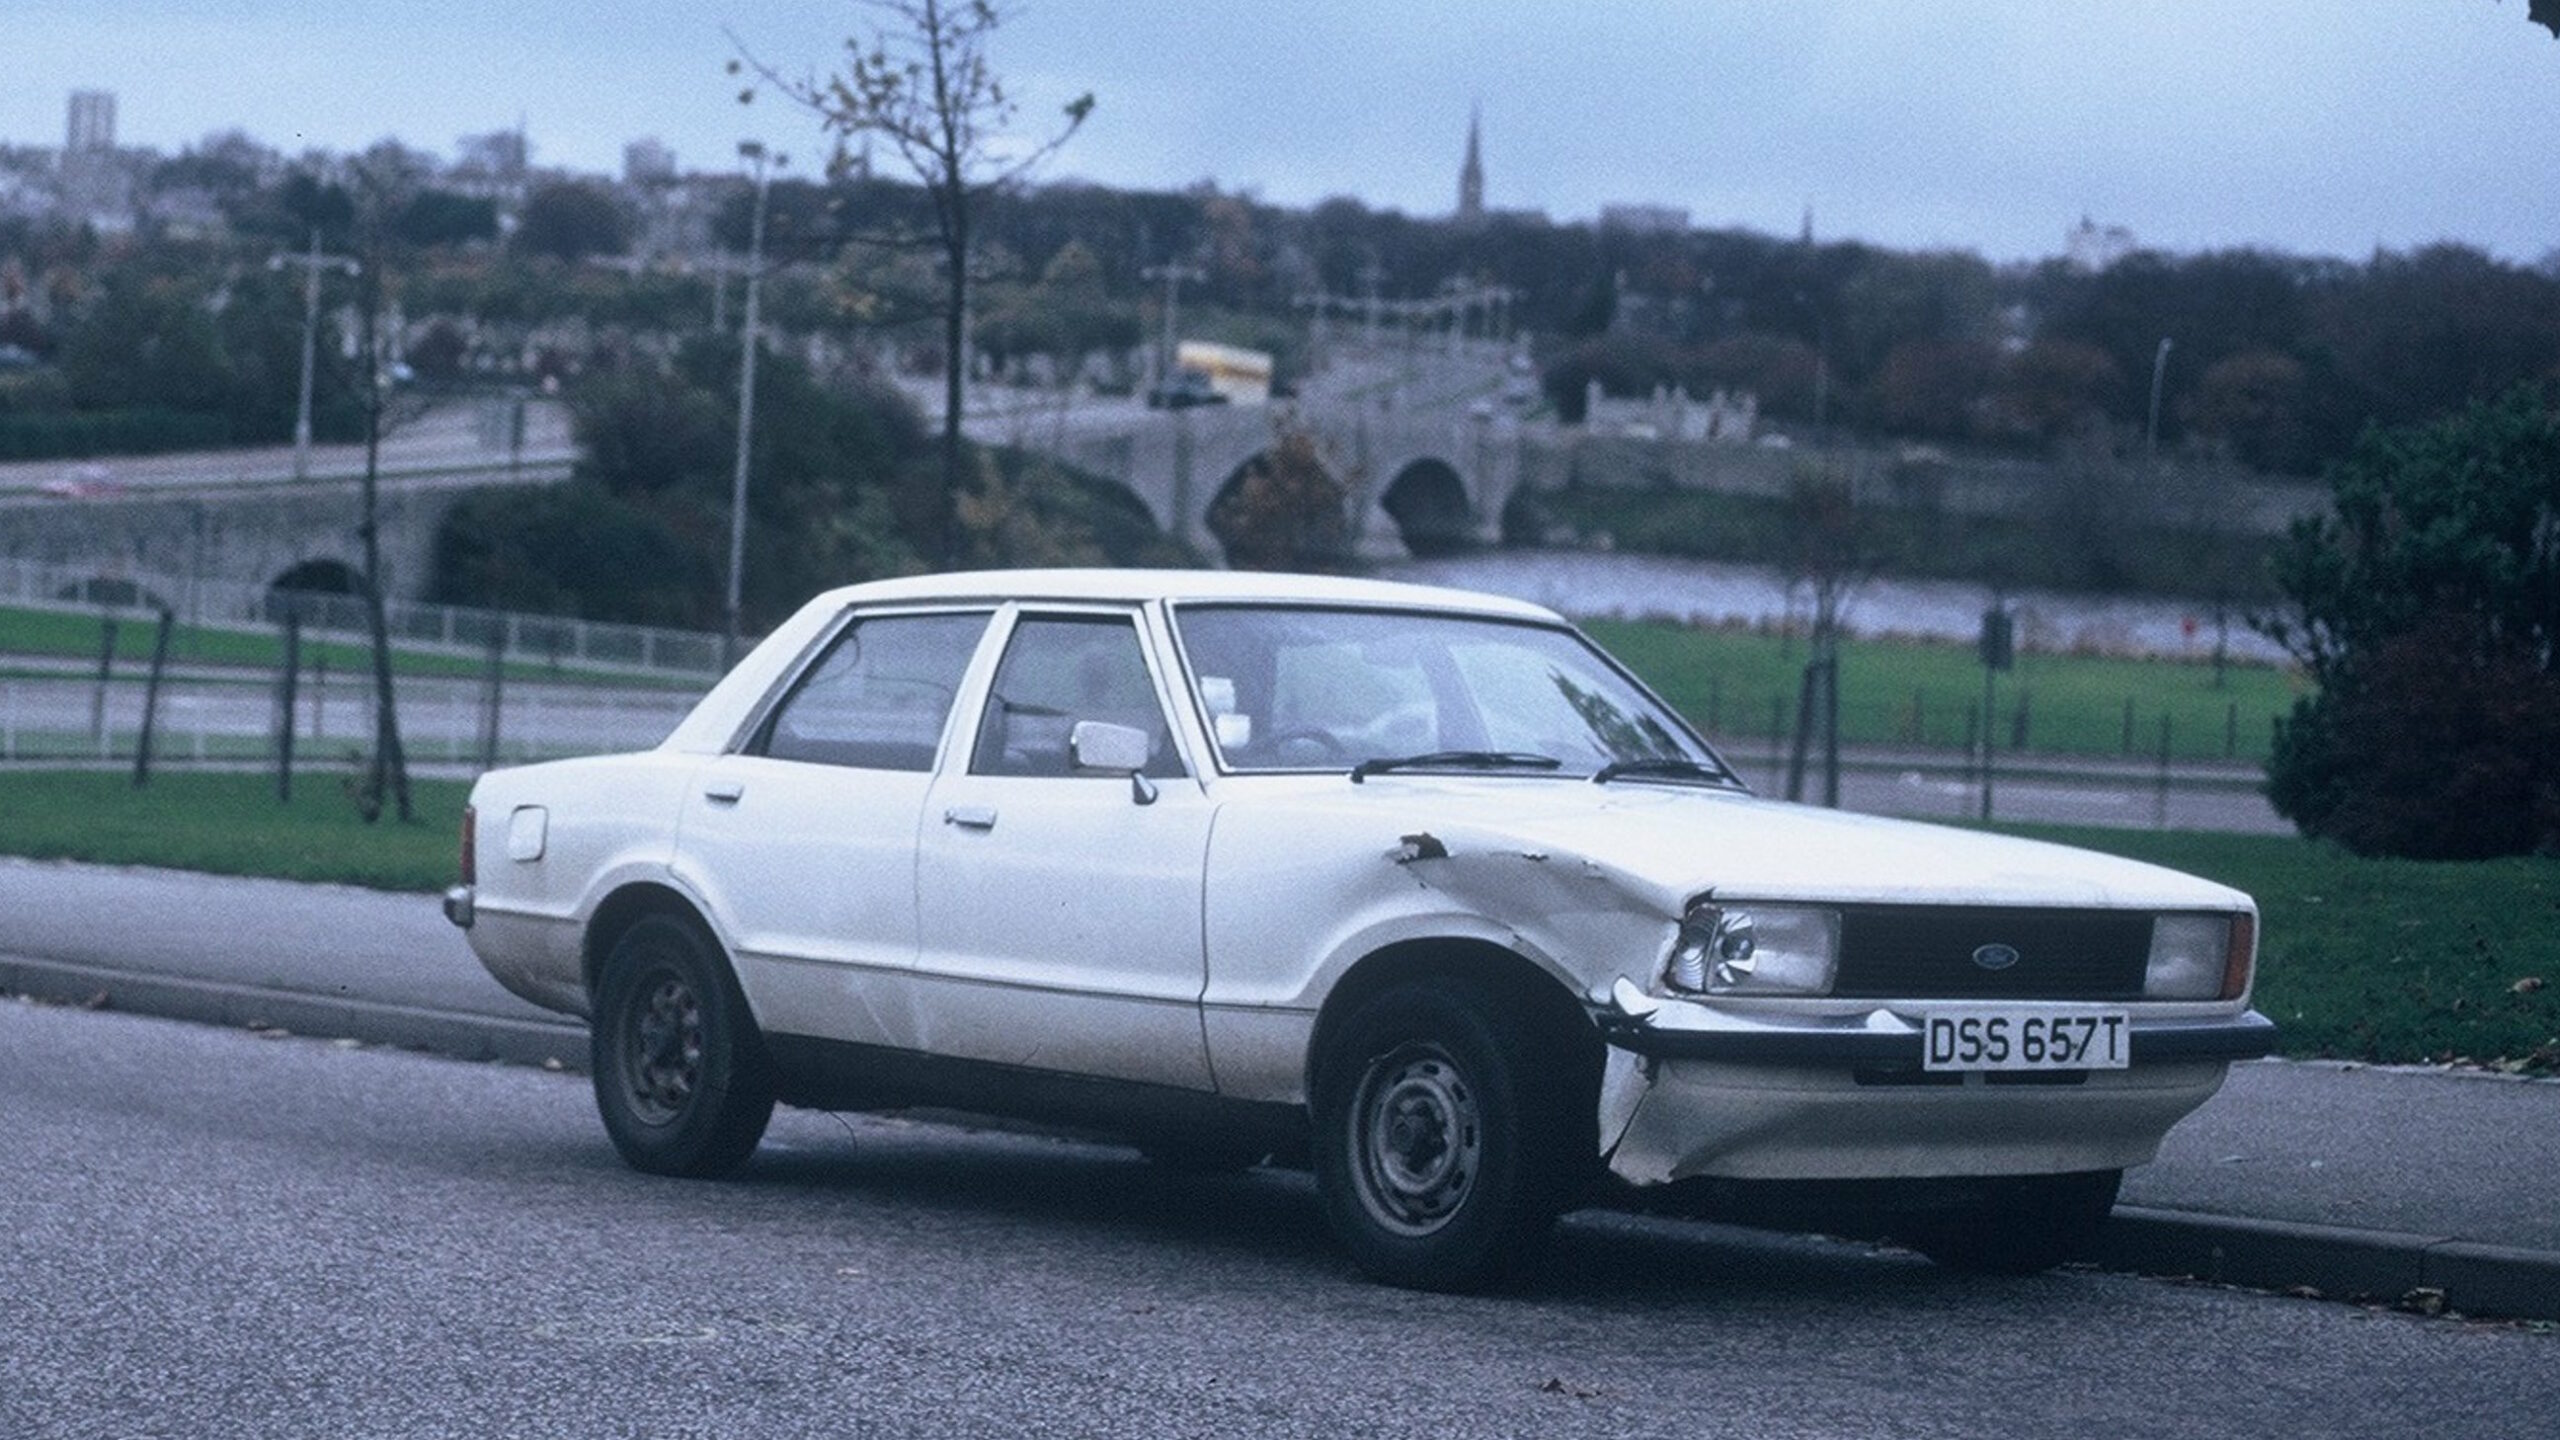 A boxy 1979 white Ford car, number plate DSS 657T with a badly dented and somewhat corroded front wheel arch on the drivers' side, sits empty and parked at the side of an otherwise empty asphalt strreet. In the background, under grey skies, a city skyline can be made out with houses, tower blocks, and a church steeple, on the other side of an arched river bridge. The leaves are early-autumn coloured: mostly greem, but with some brown appearing and a handful of bare branches exposed.